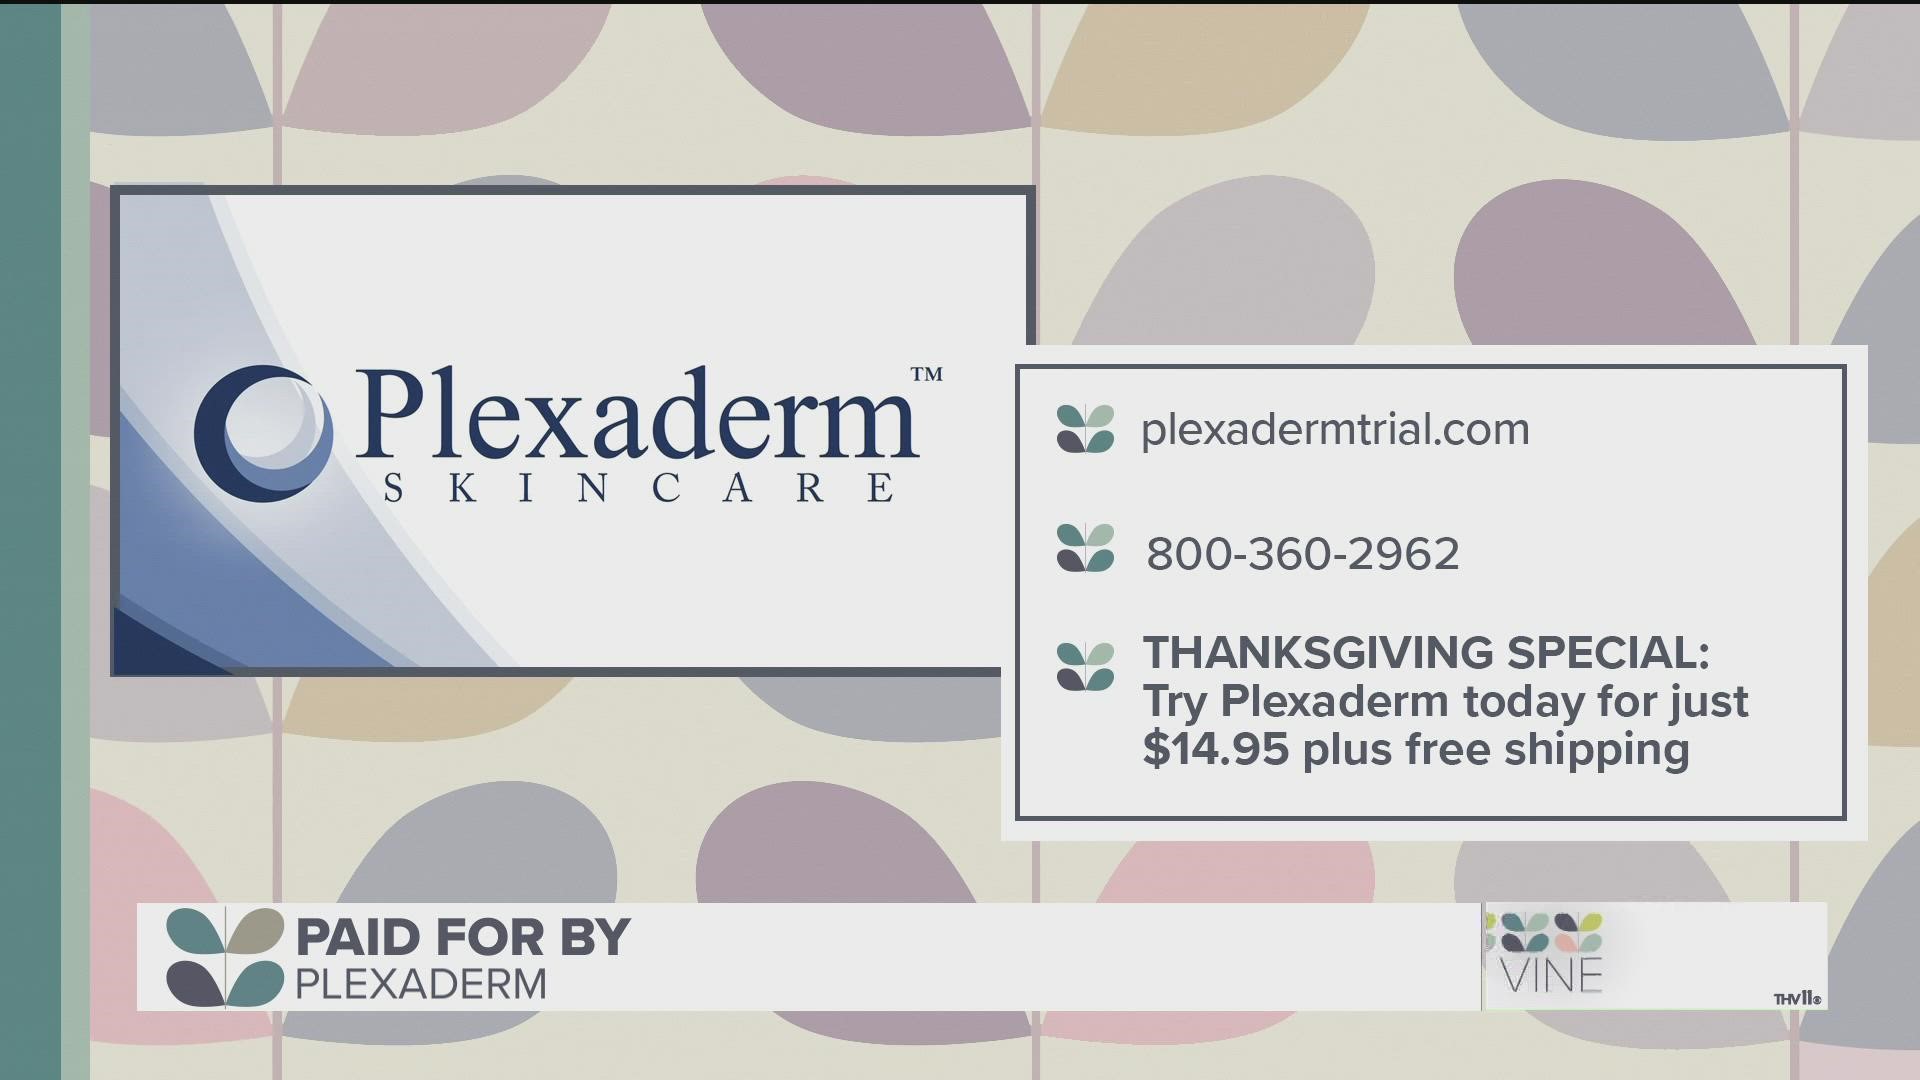 Plexaderm Skincare is offering a special to The Vine viewers: Try Plexaderm today for just $14.95 plus free shipping. Visit www.plexadermtrial.com for info.